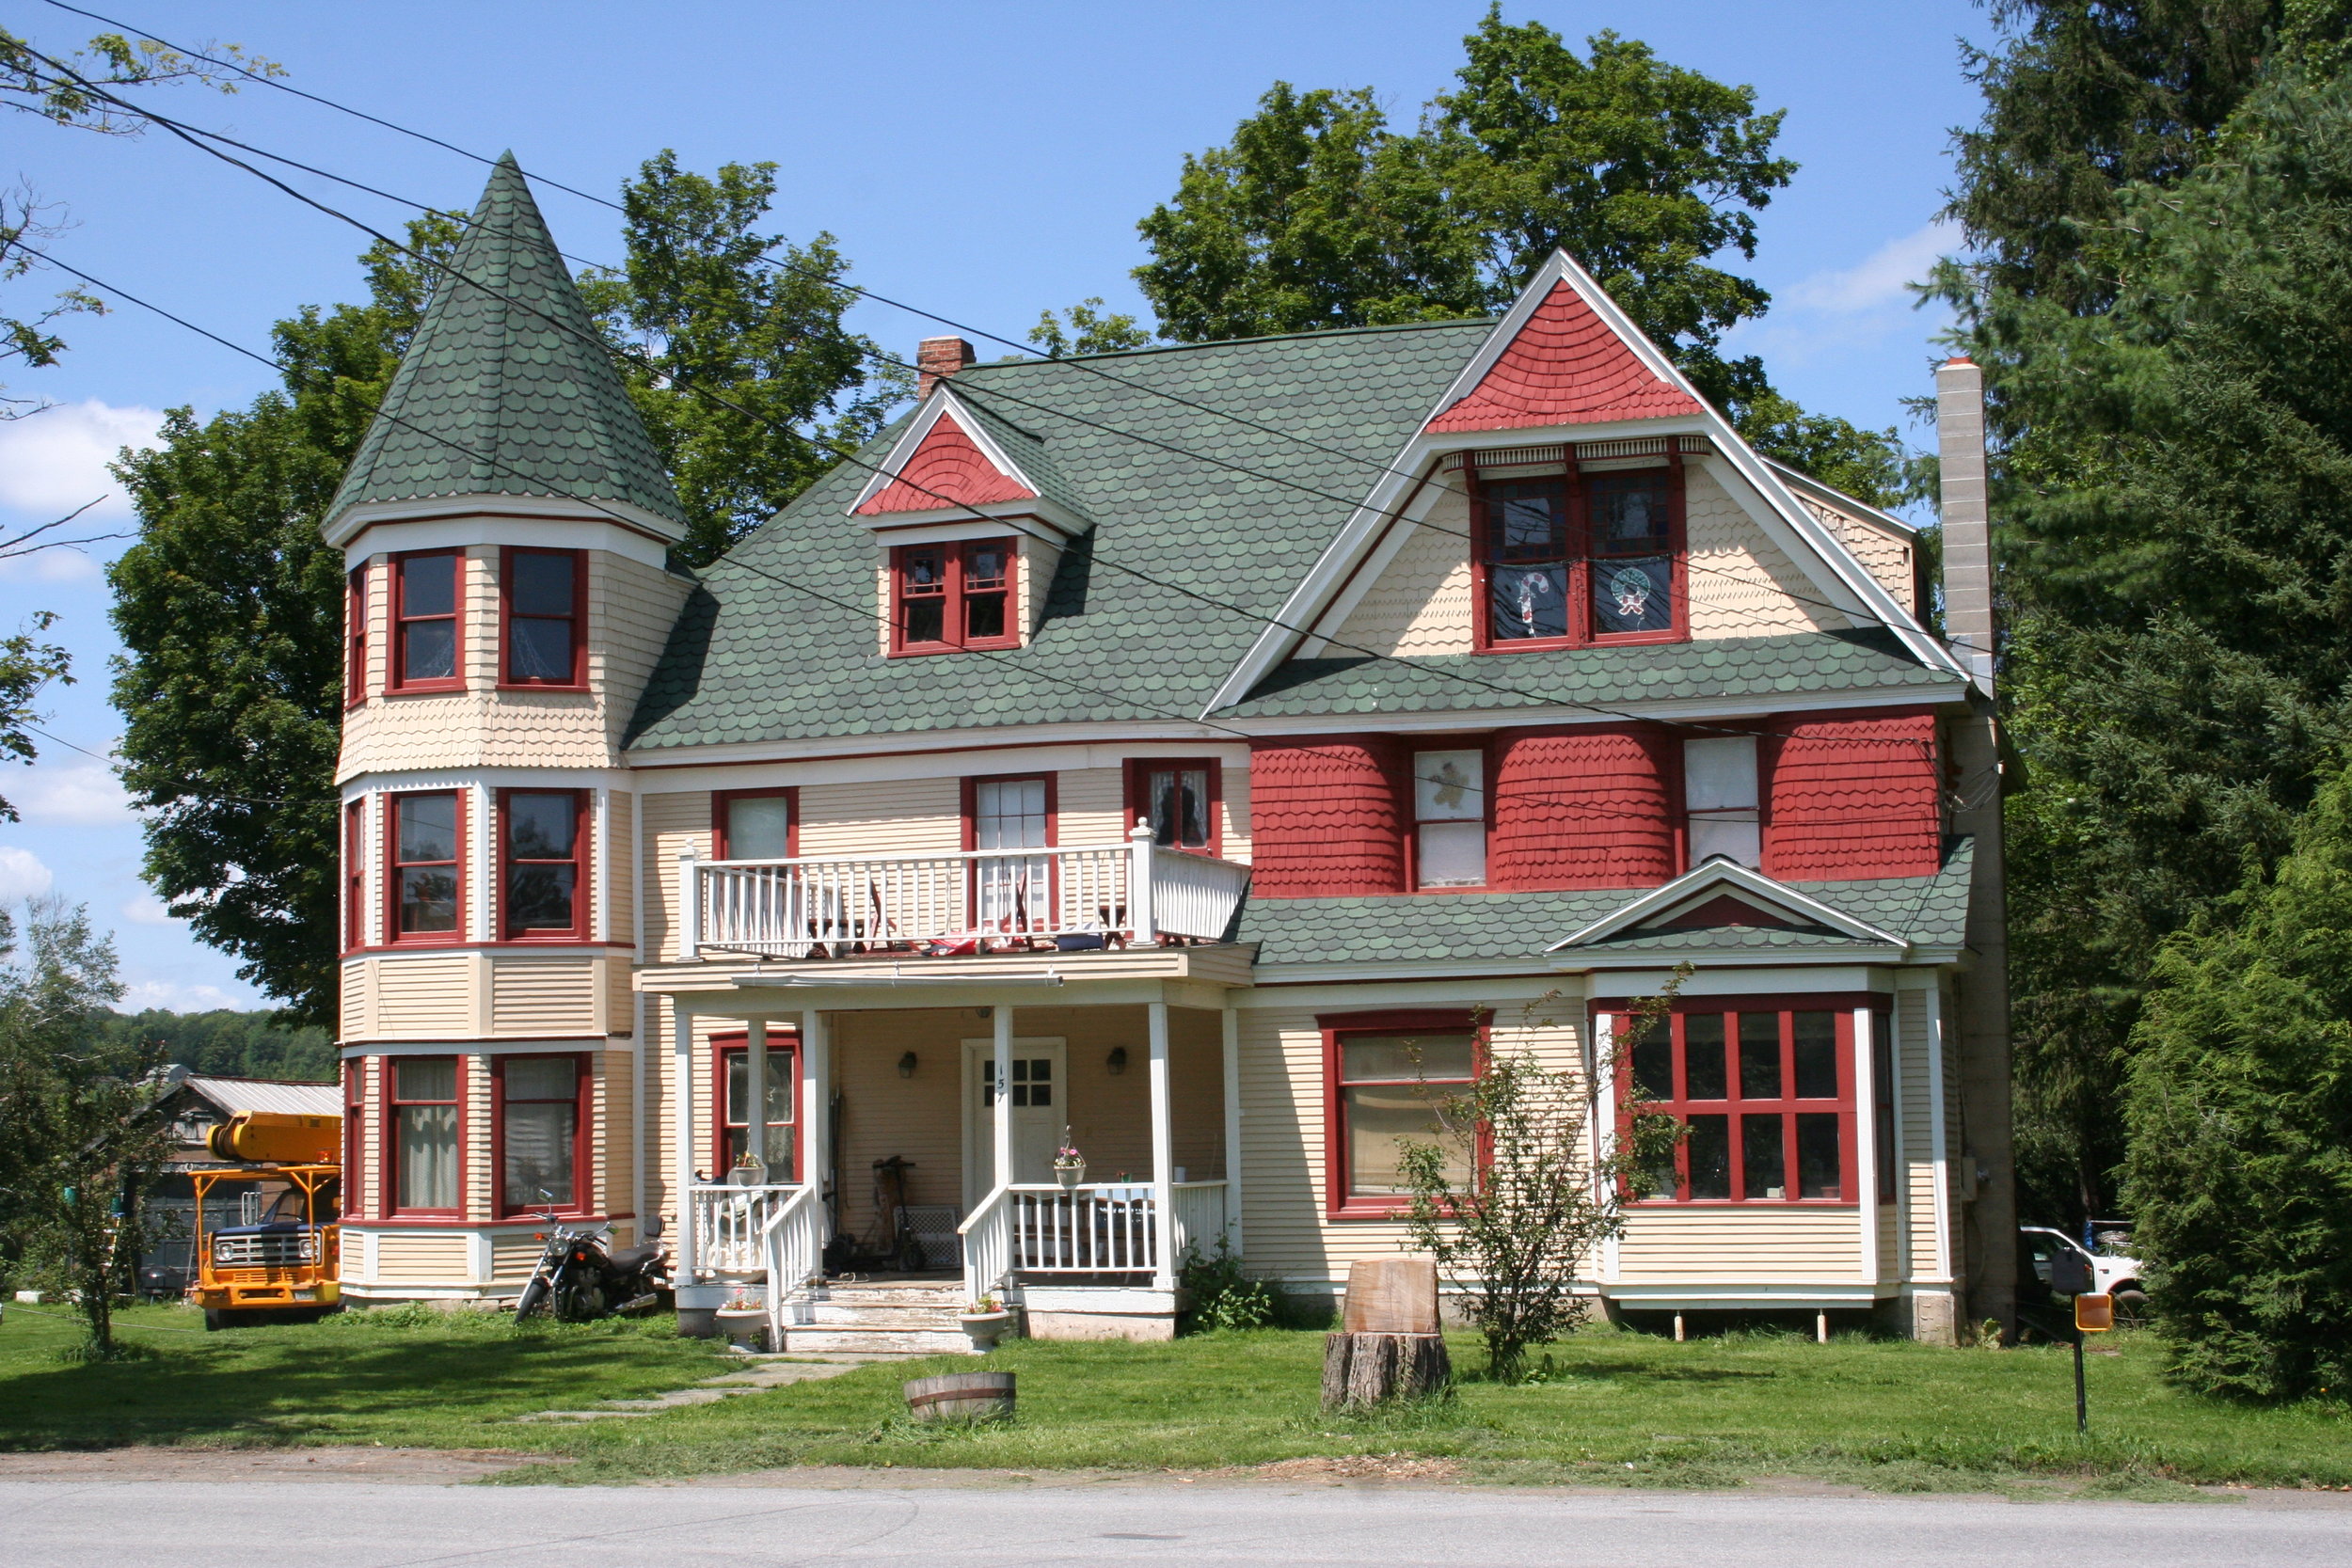 Hamlet of Jefferson (Dr. Richtmyer Hubbell house pictured)